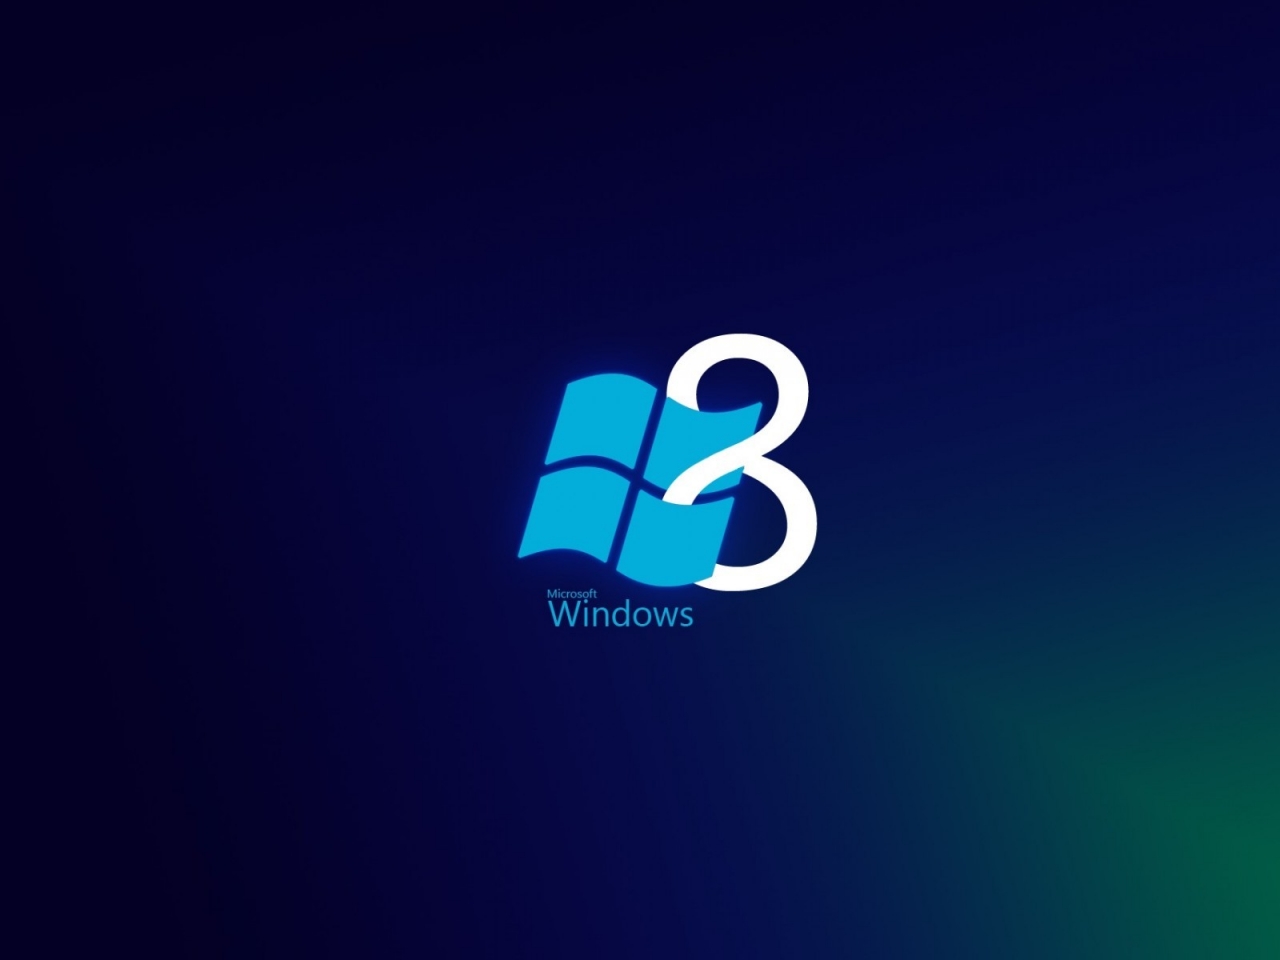 Windows 8 Blue Style for 1280 x 960 resolution